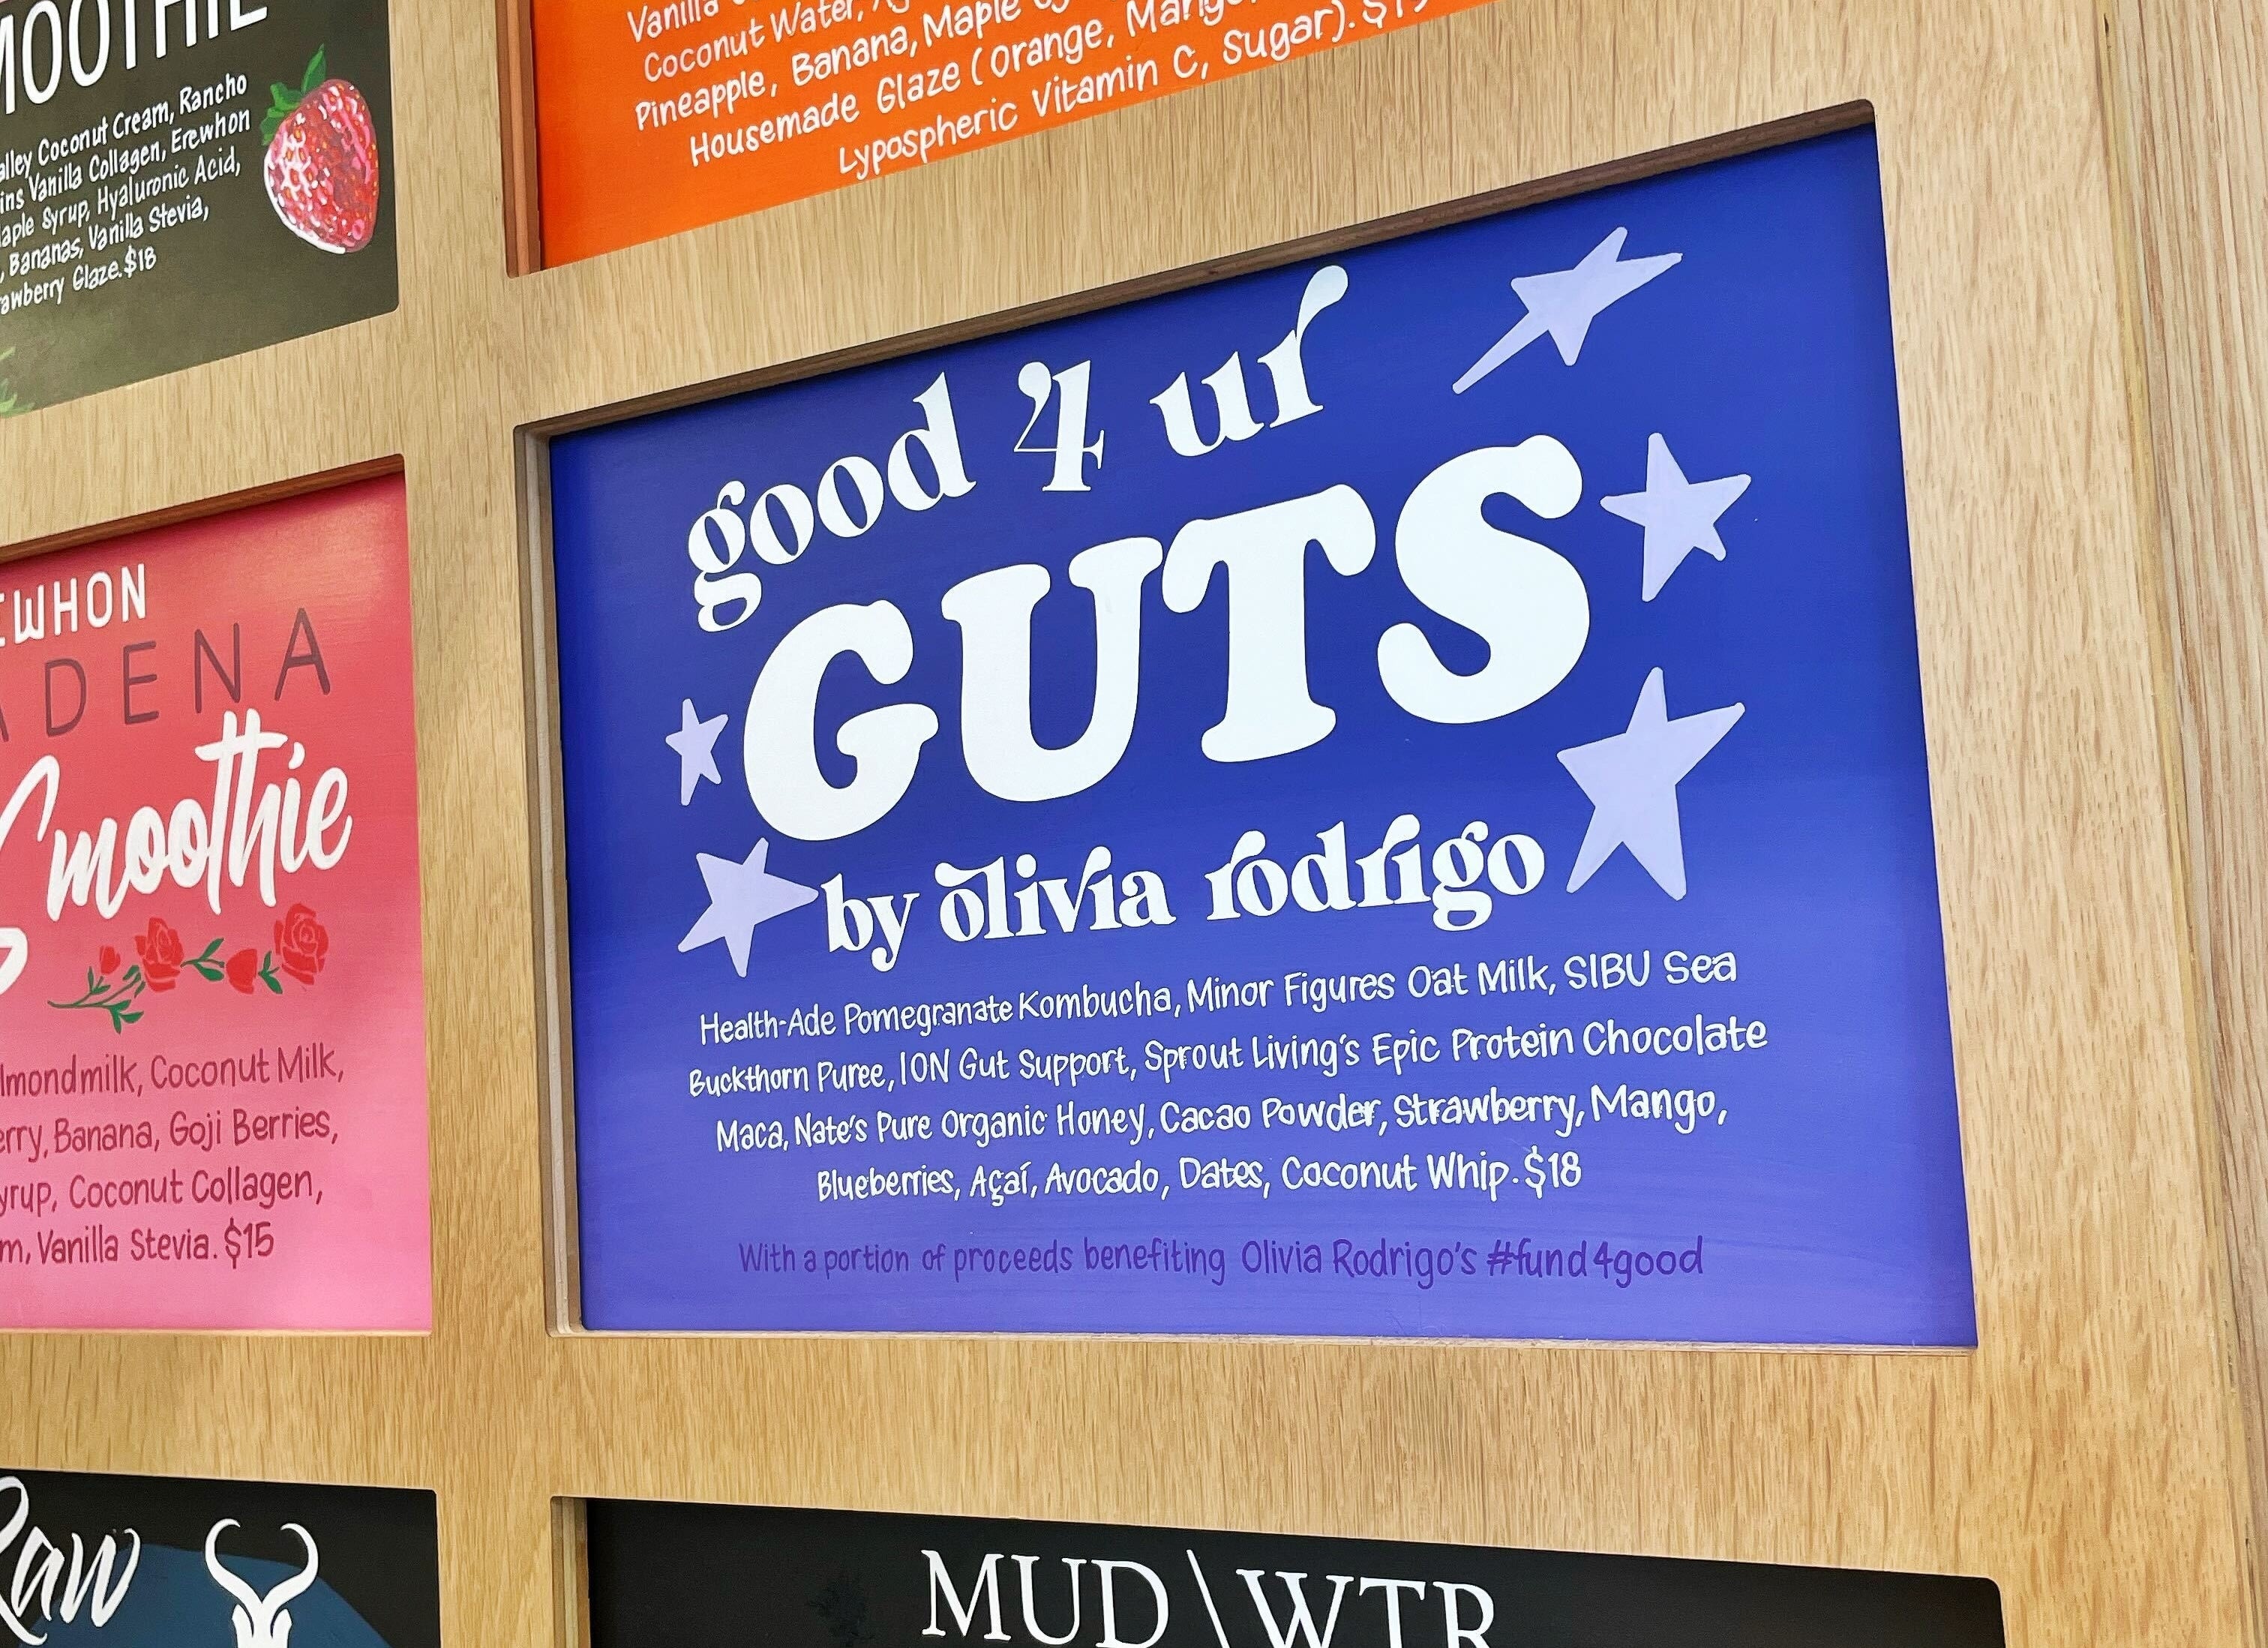 The menu board for Olivia Rodrigo&#x27;s &quot;Good 4 ur GUTS&quot; smoothie is shown